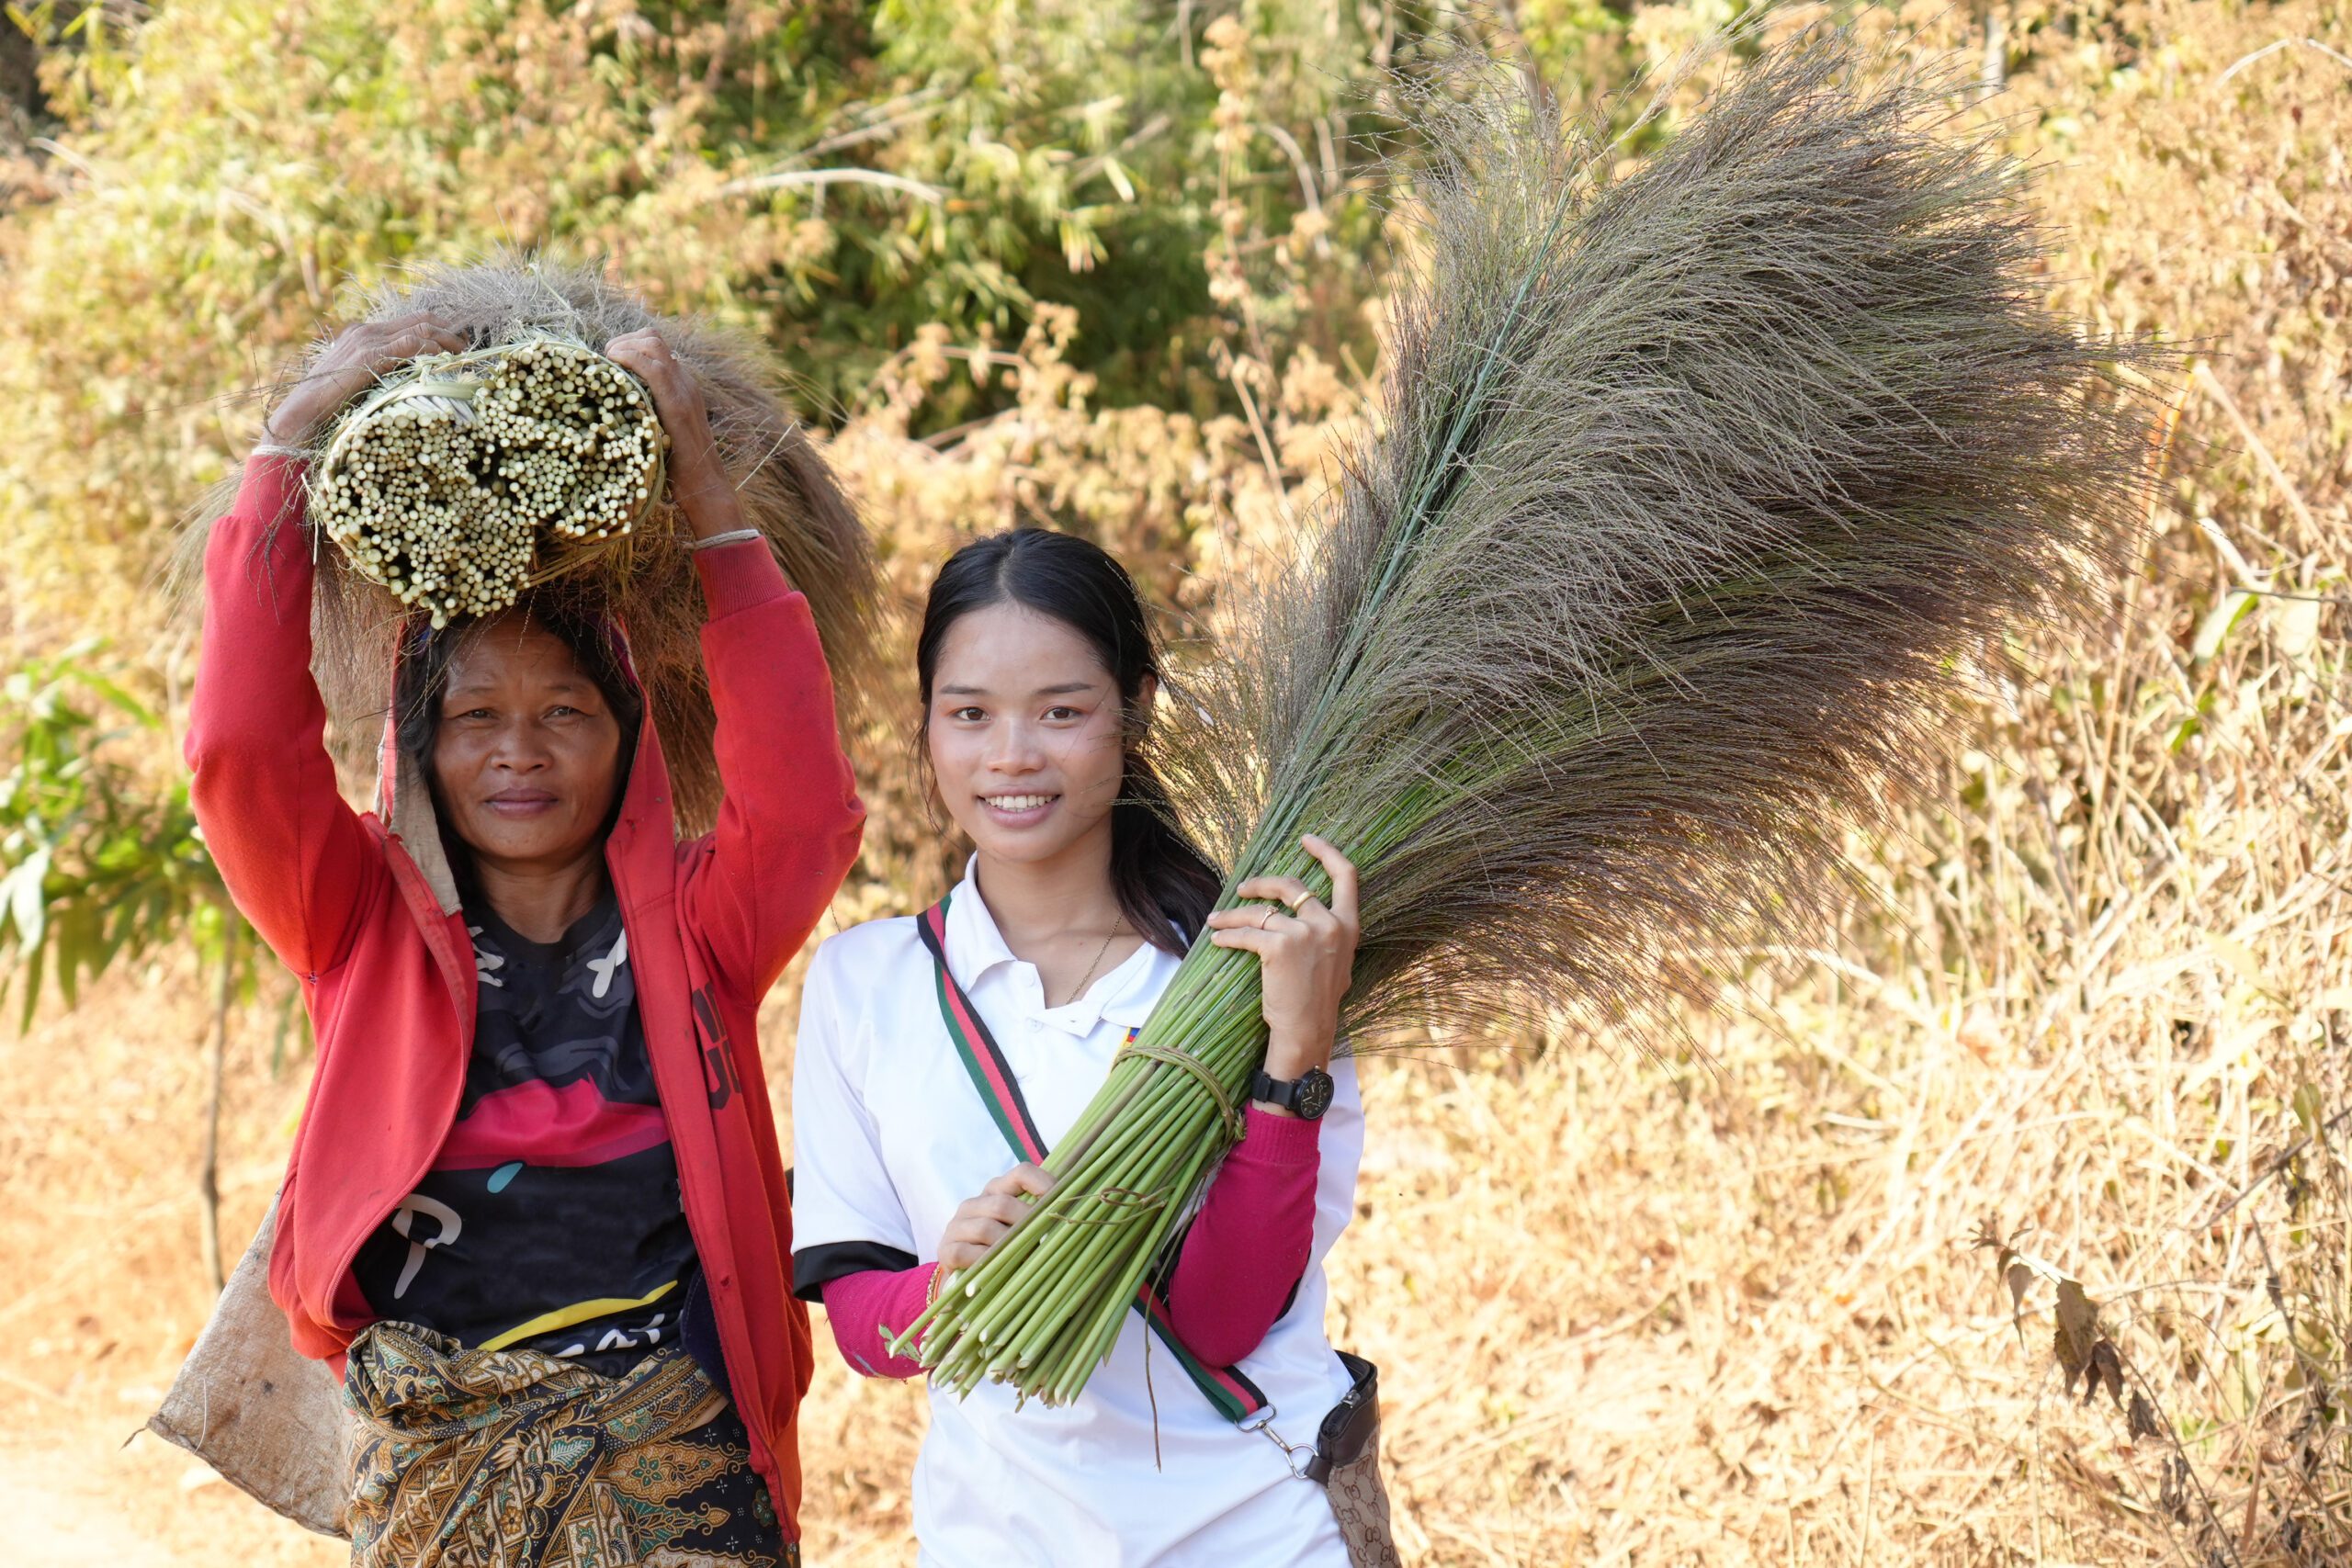 Vone and her daughter holding broom grass flowers.